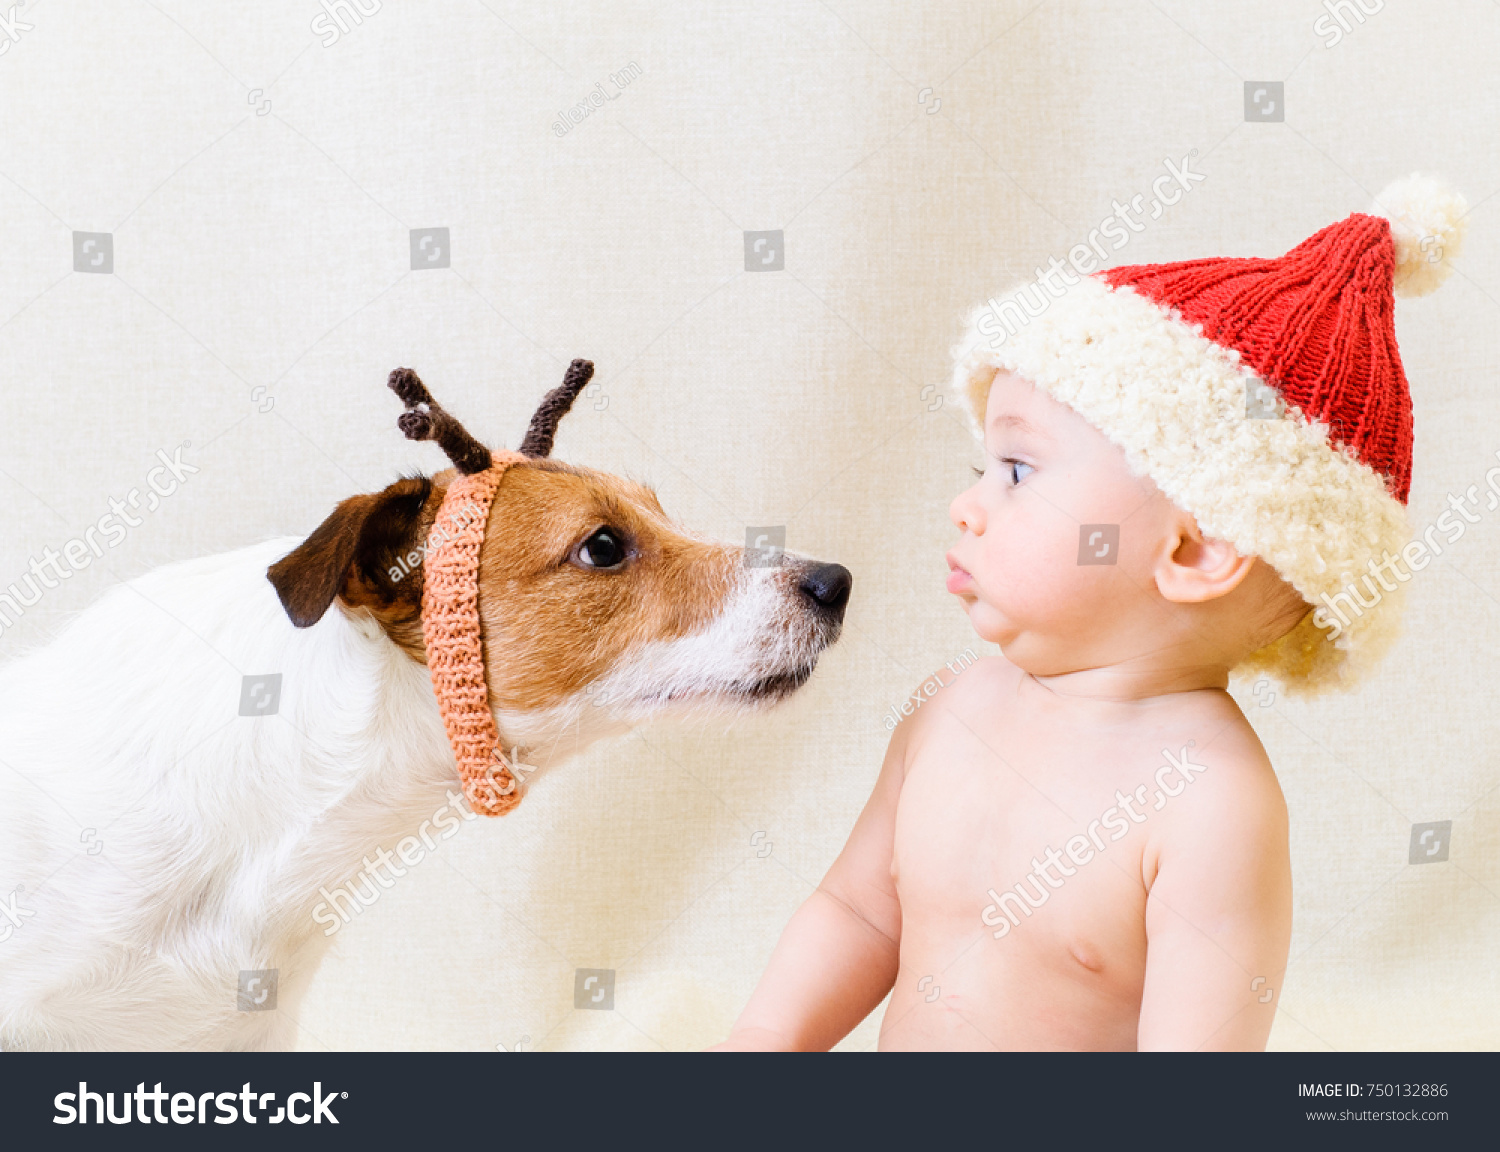 Amusing Santa Claus meets funny reindeer. Dog and kid wearing Christmas costumes  #750132886